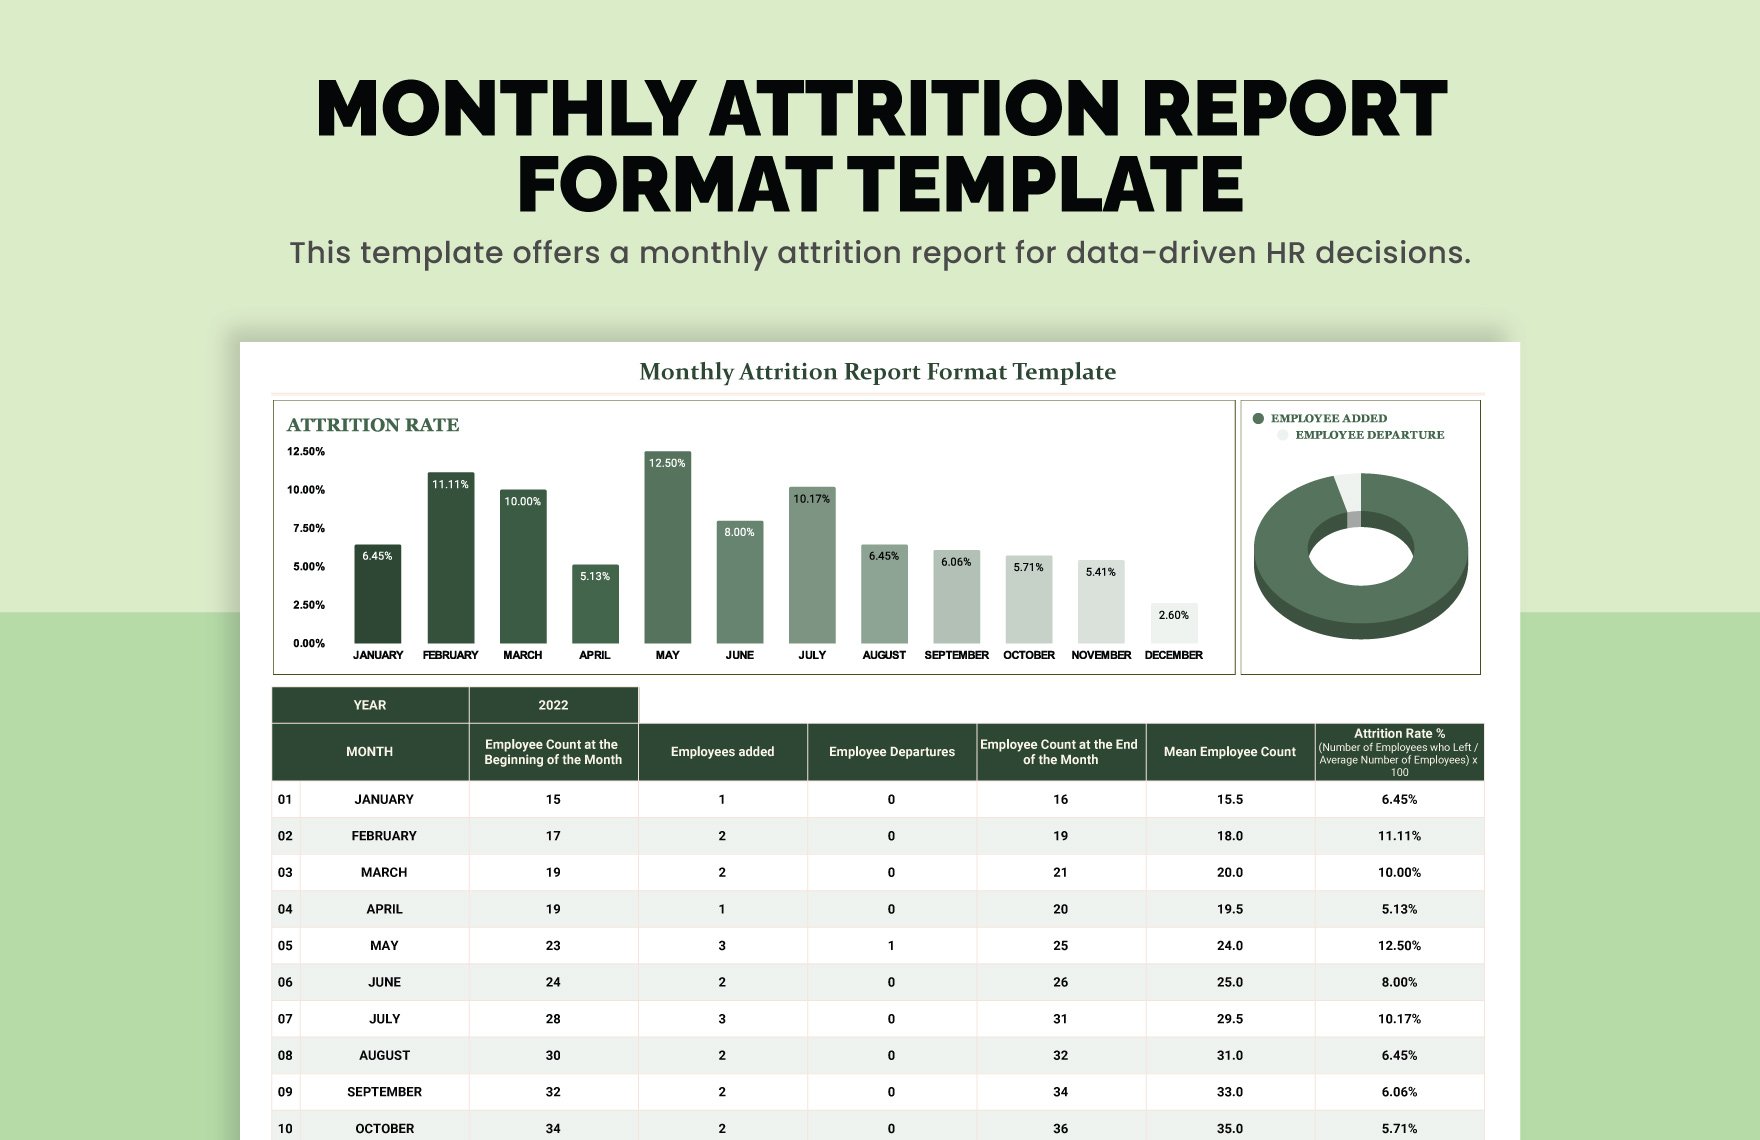 Monthly Attrition Report Format Template